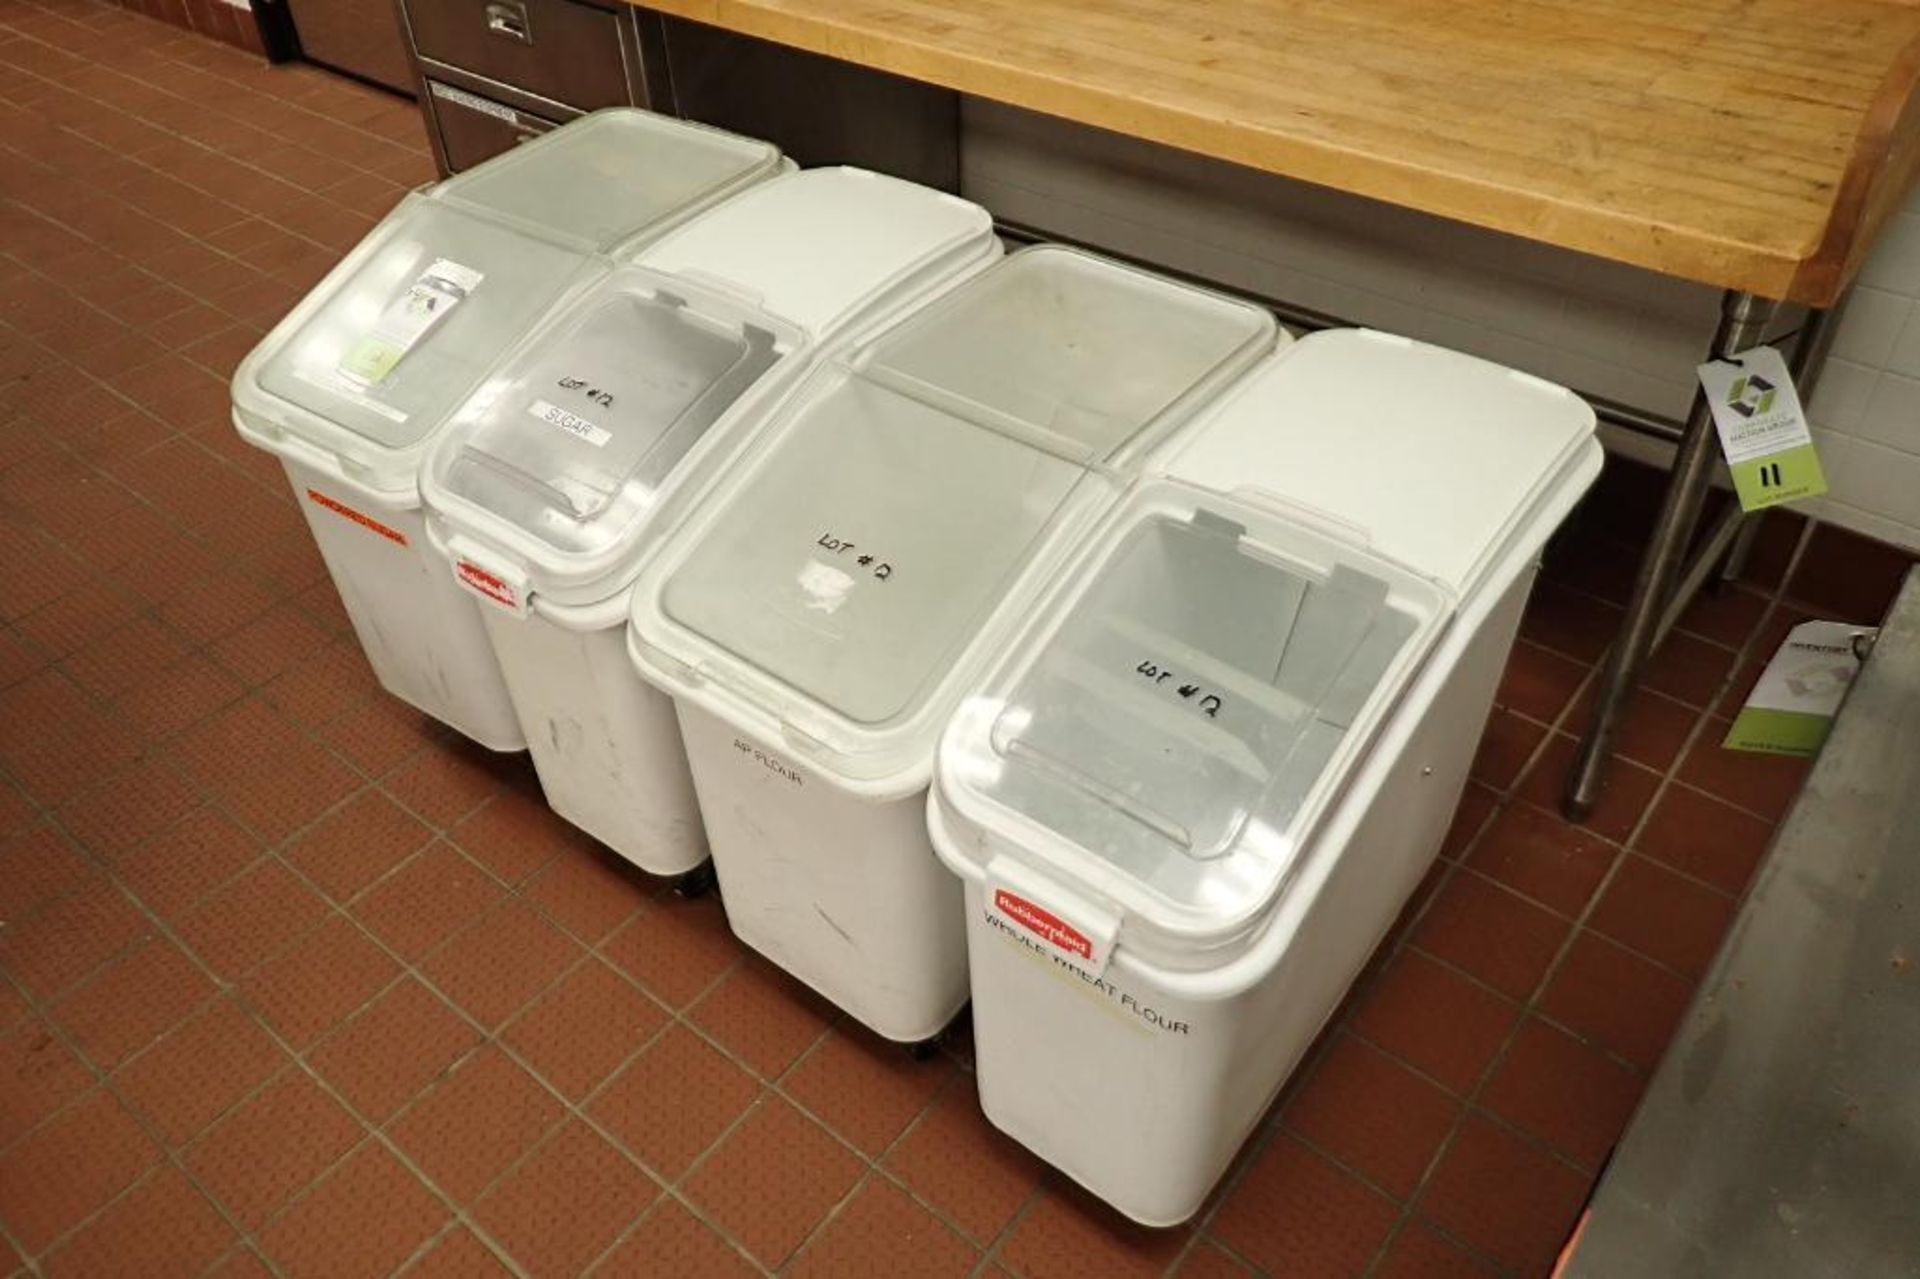 Rubbermaid plastic ingredient bins, 30 in. long x 15 in. wide x 28 in. tall, on casters - Image 4 of 4